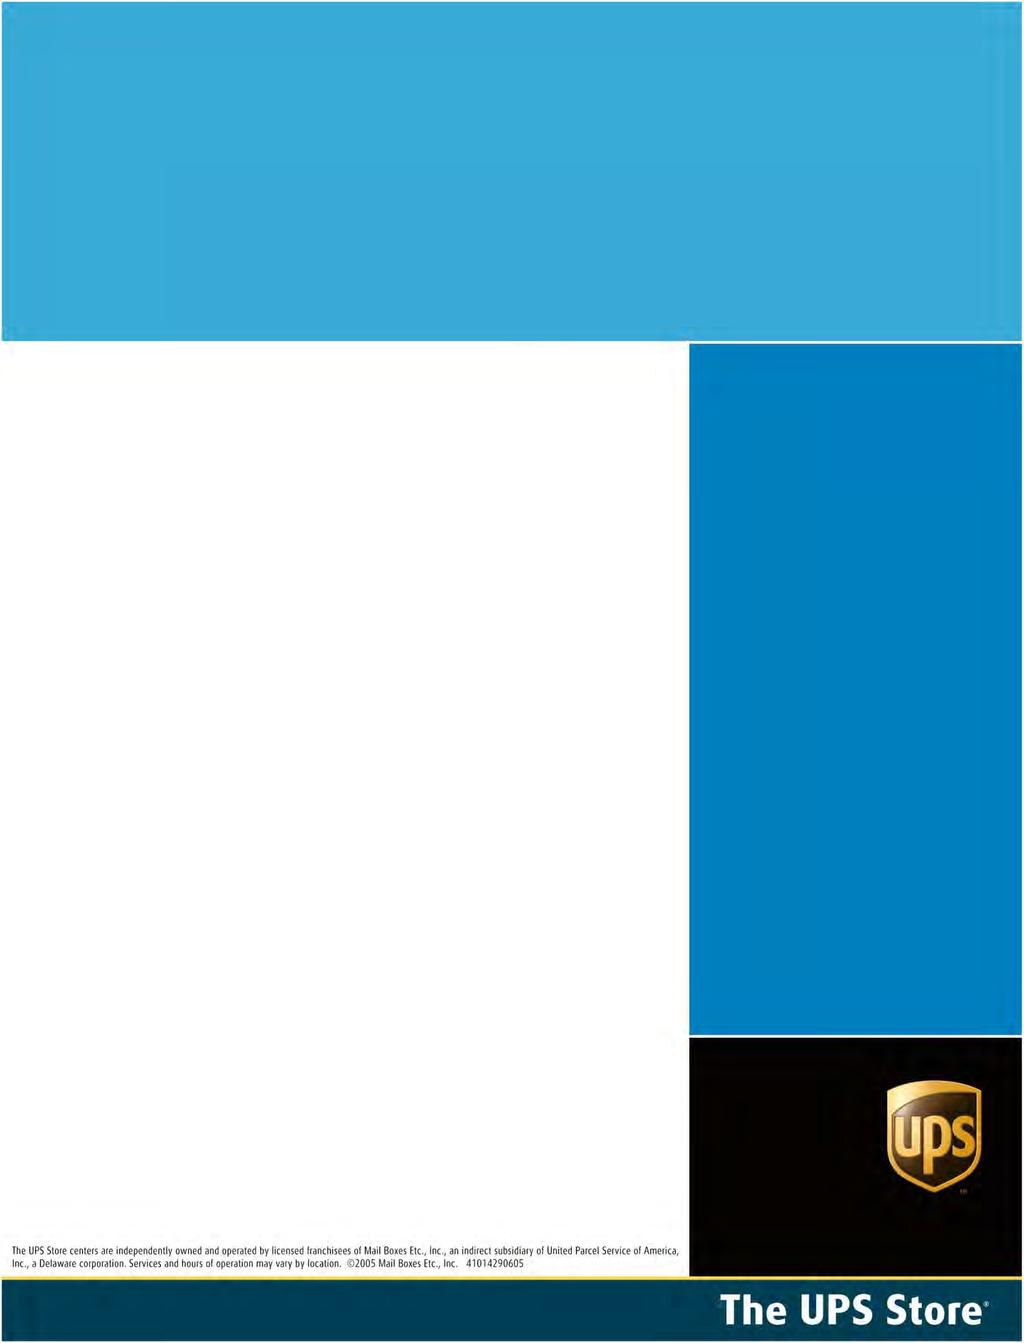 The UPS Store at the The UPS Store Products & Services Printing Products: Flyers Brochures Presentations Manuals Letterhead Newsletters Business Cards Posters Any Size Postcards Banners Invitations